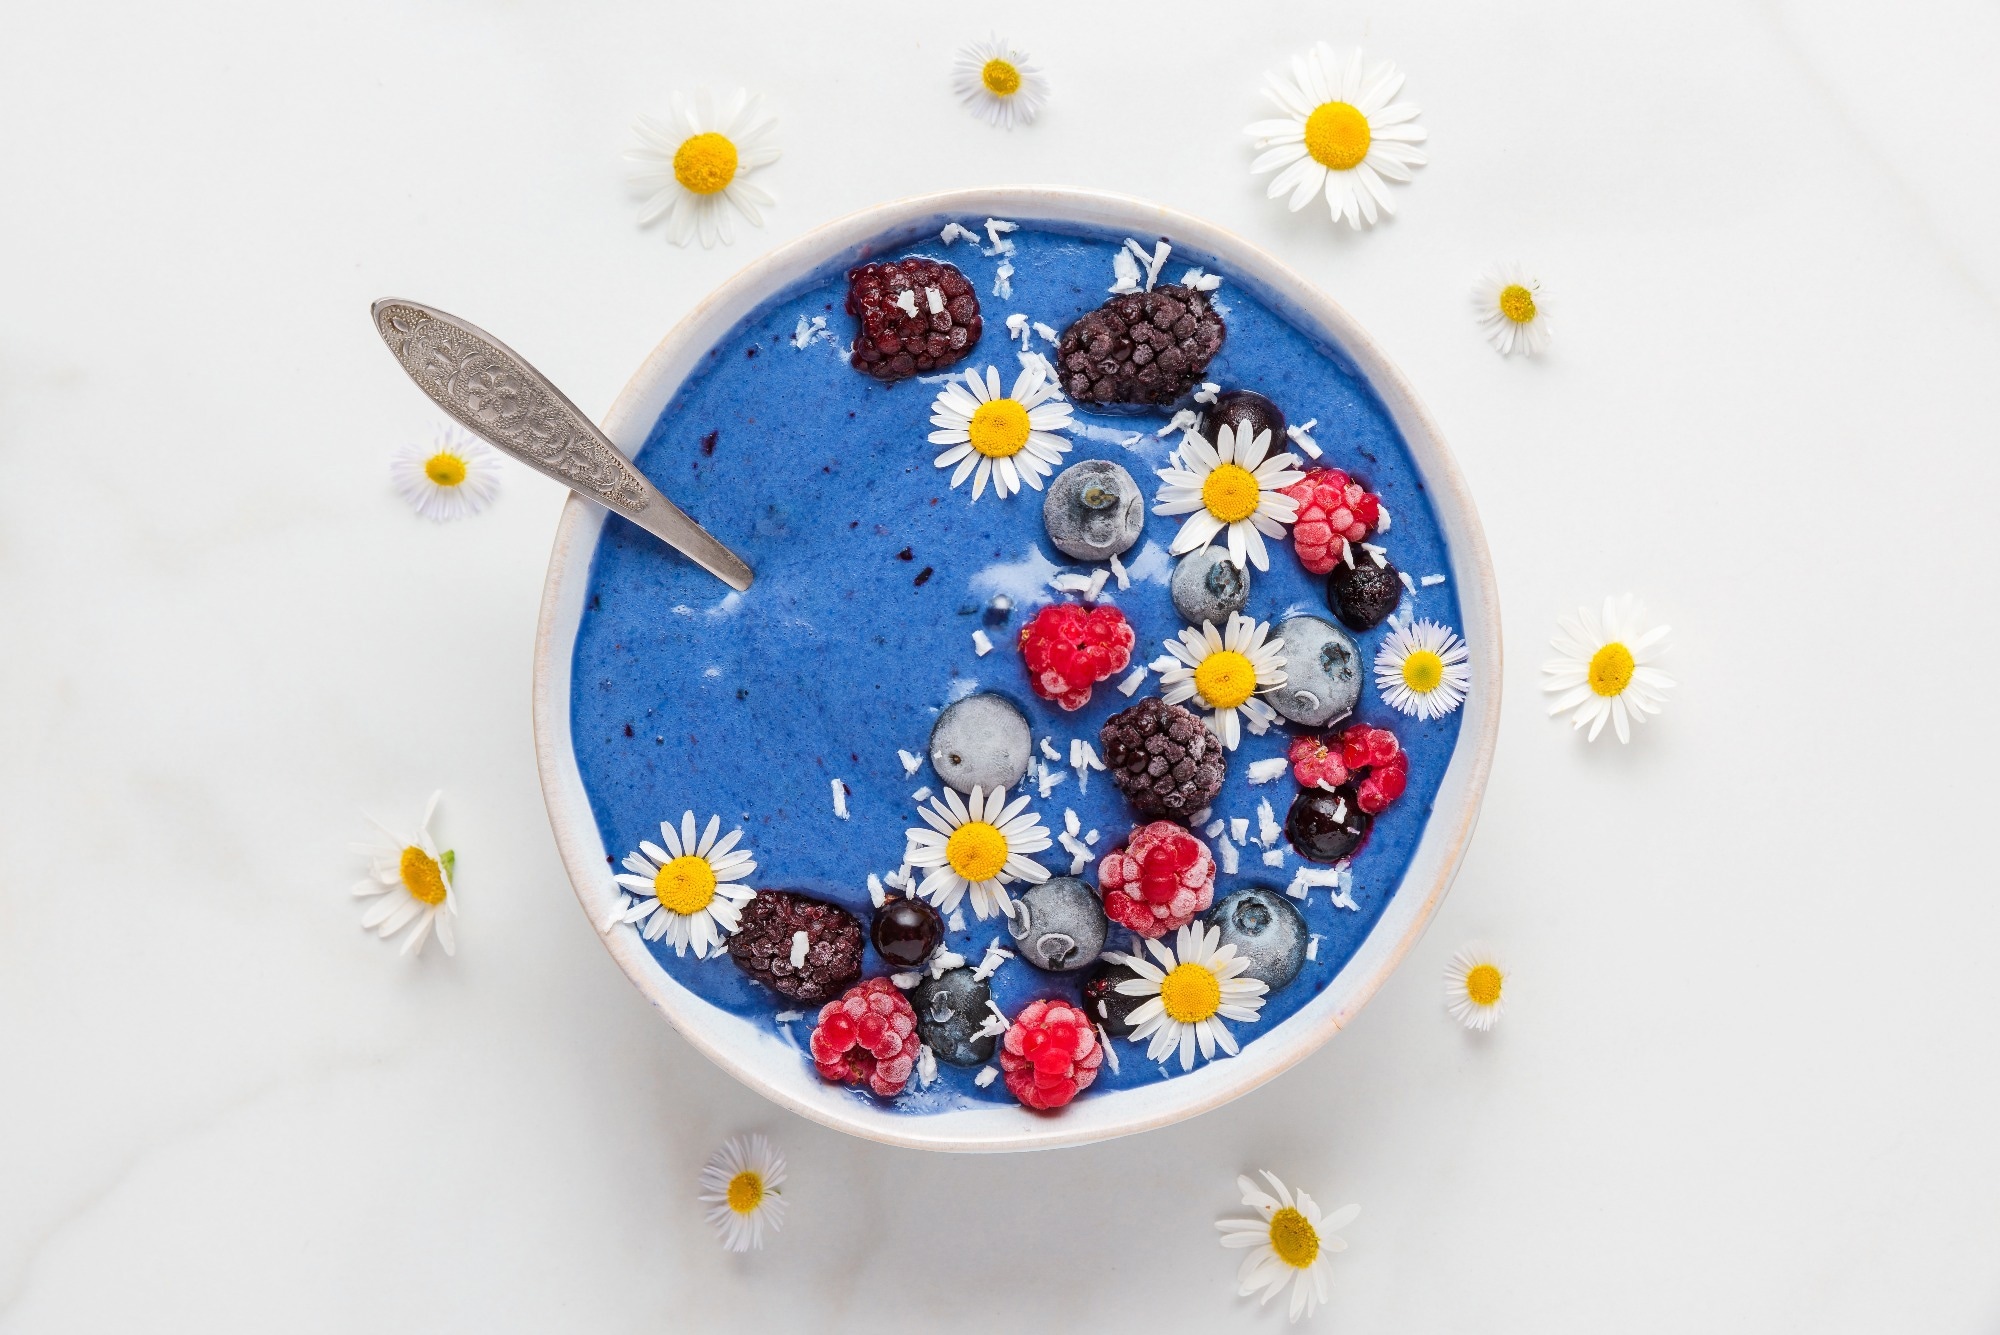 Study: Attitudes of consumers toward Spirulina and açaí and their use as a food ingredient. Image Credit: artem evdokimov / Shutterstock